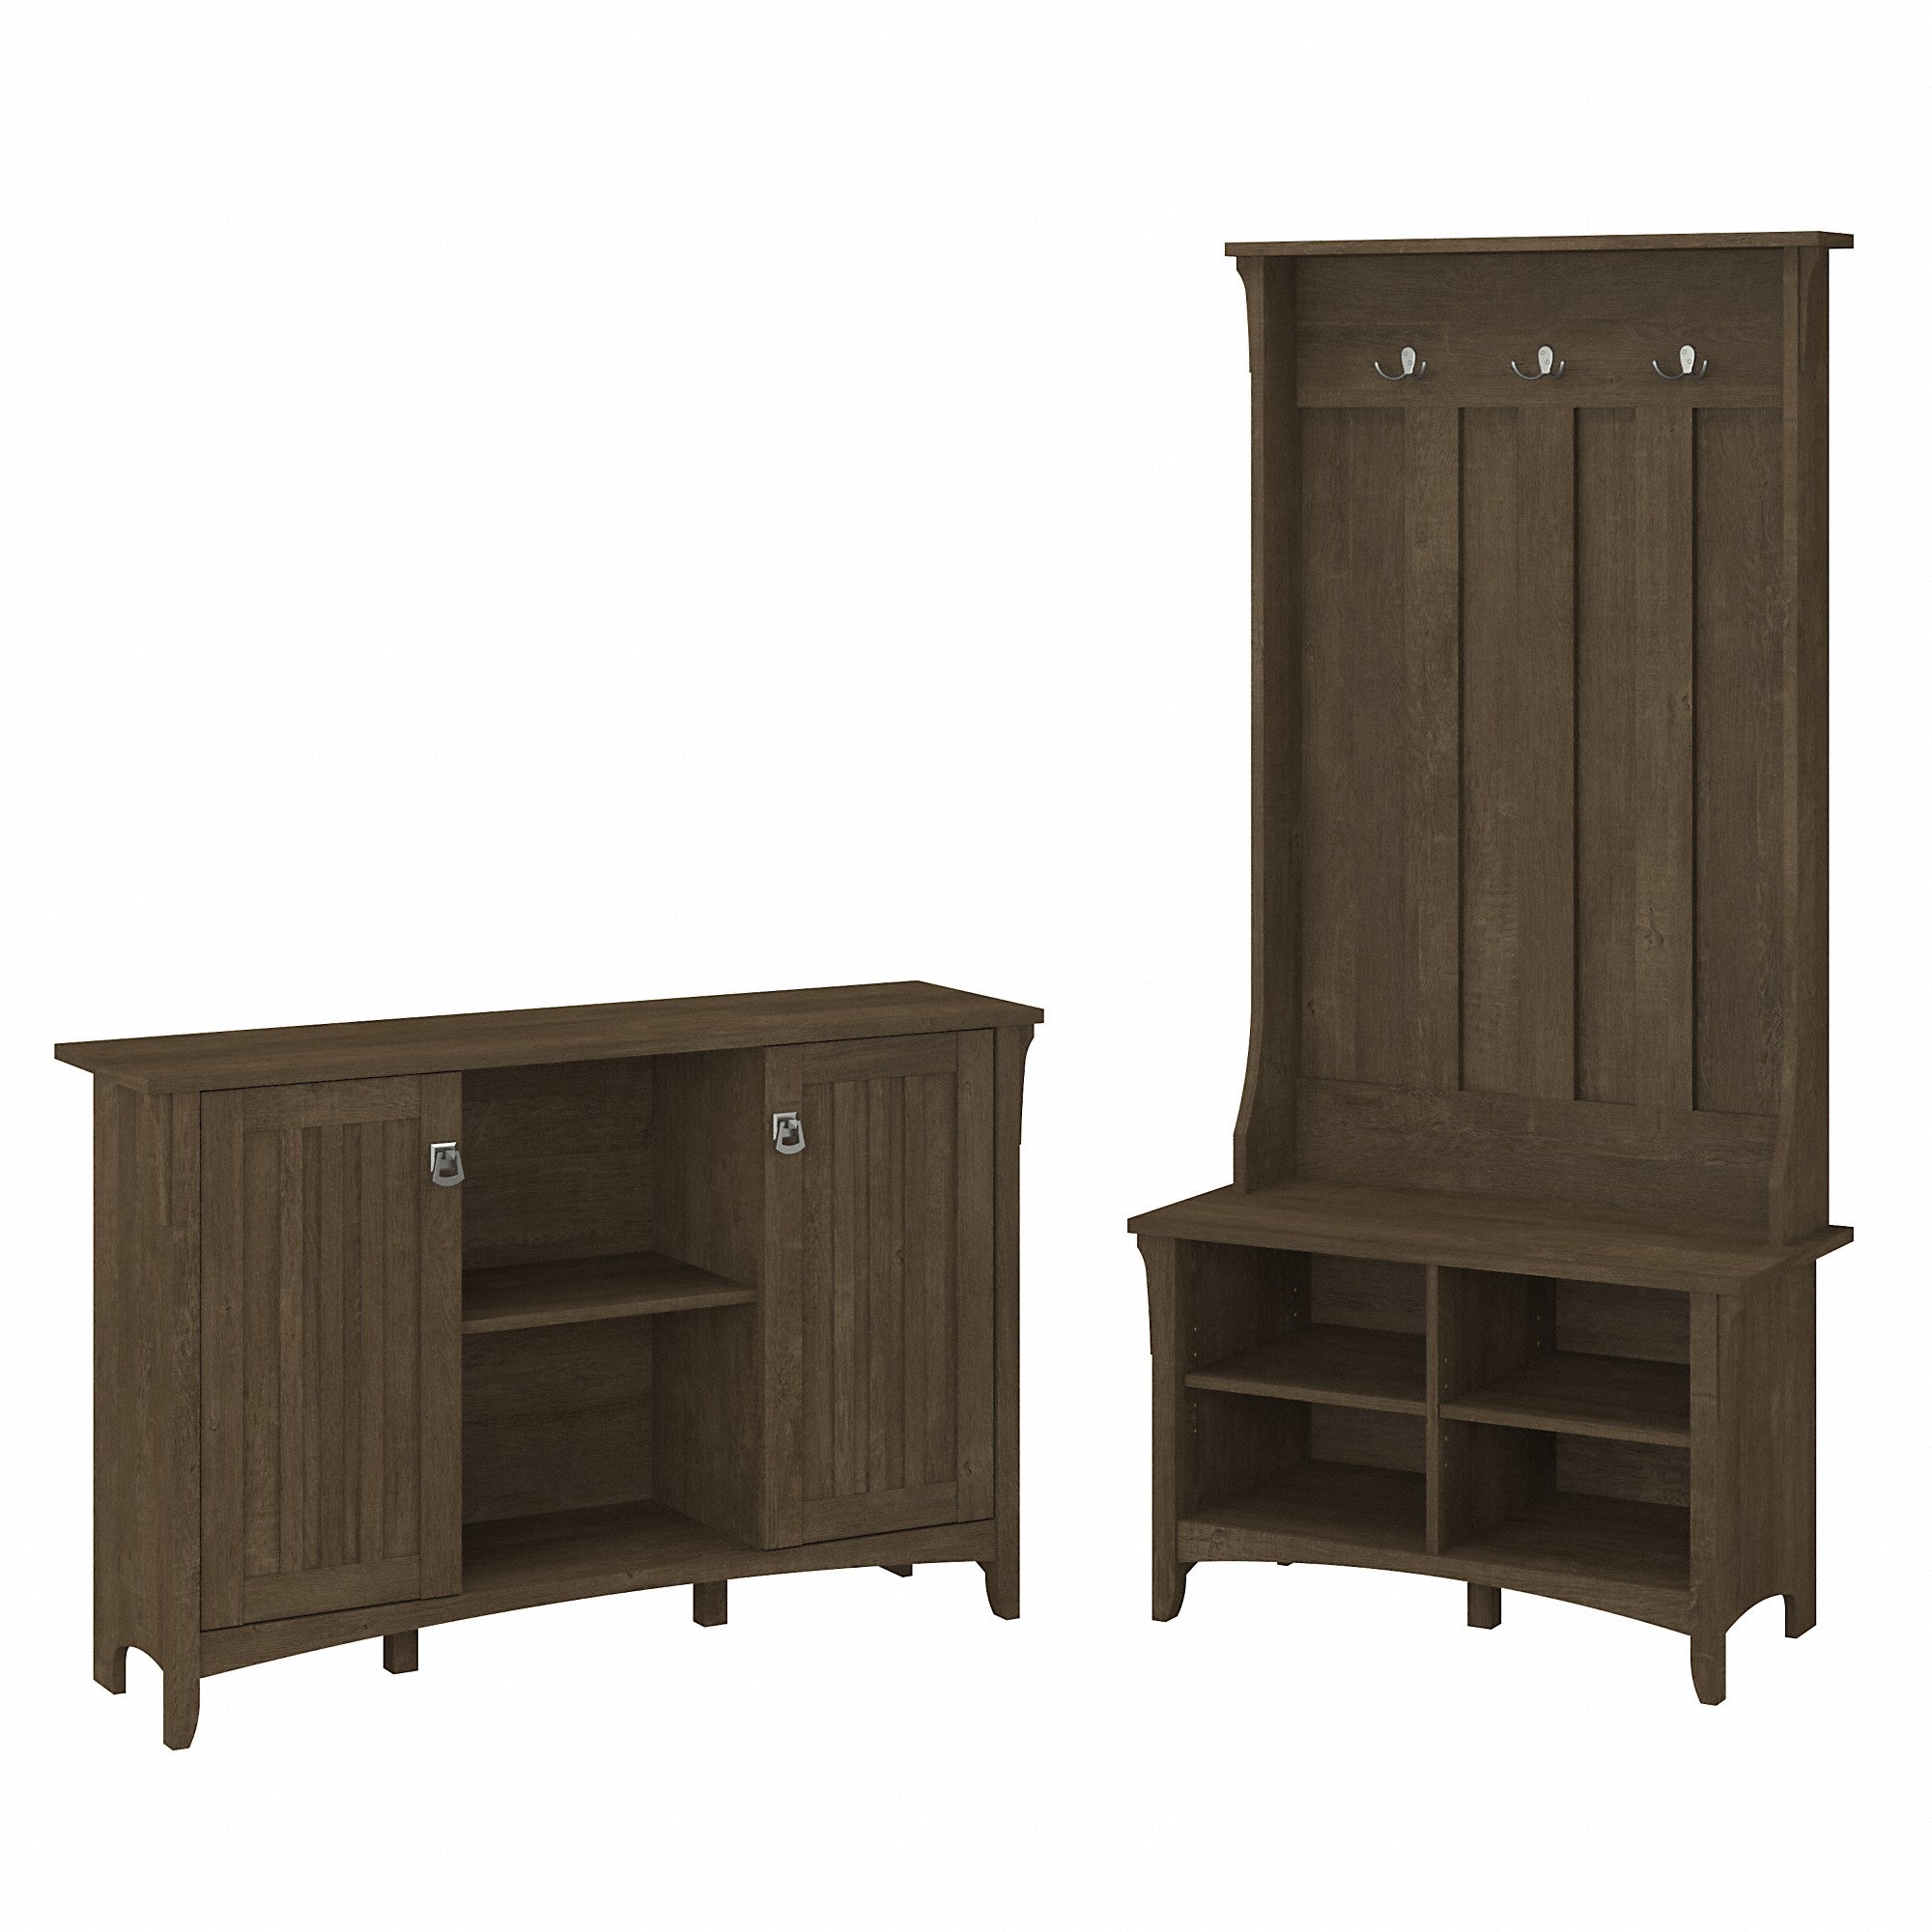 Bush Furniture Salinas Entryway Storage Set with Hall Tree, Shoe Bench and Accent Cabinet | Ash Brown